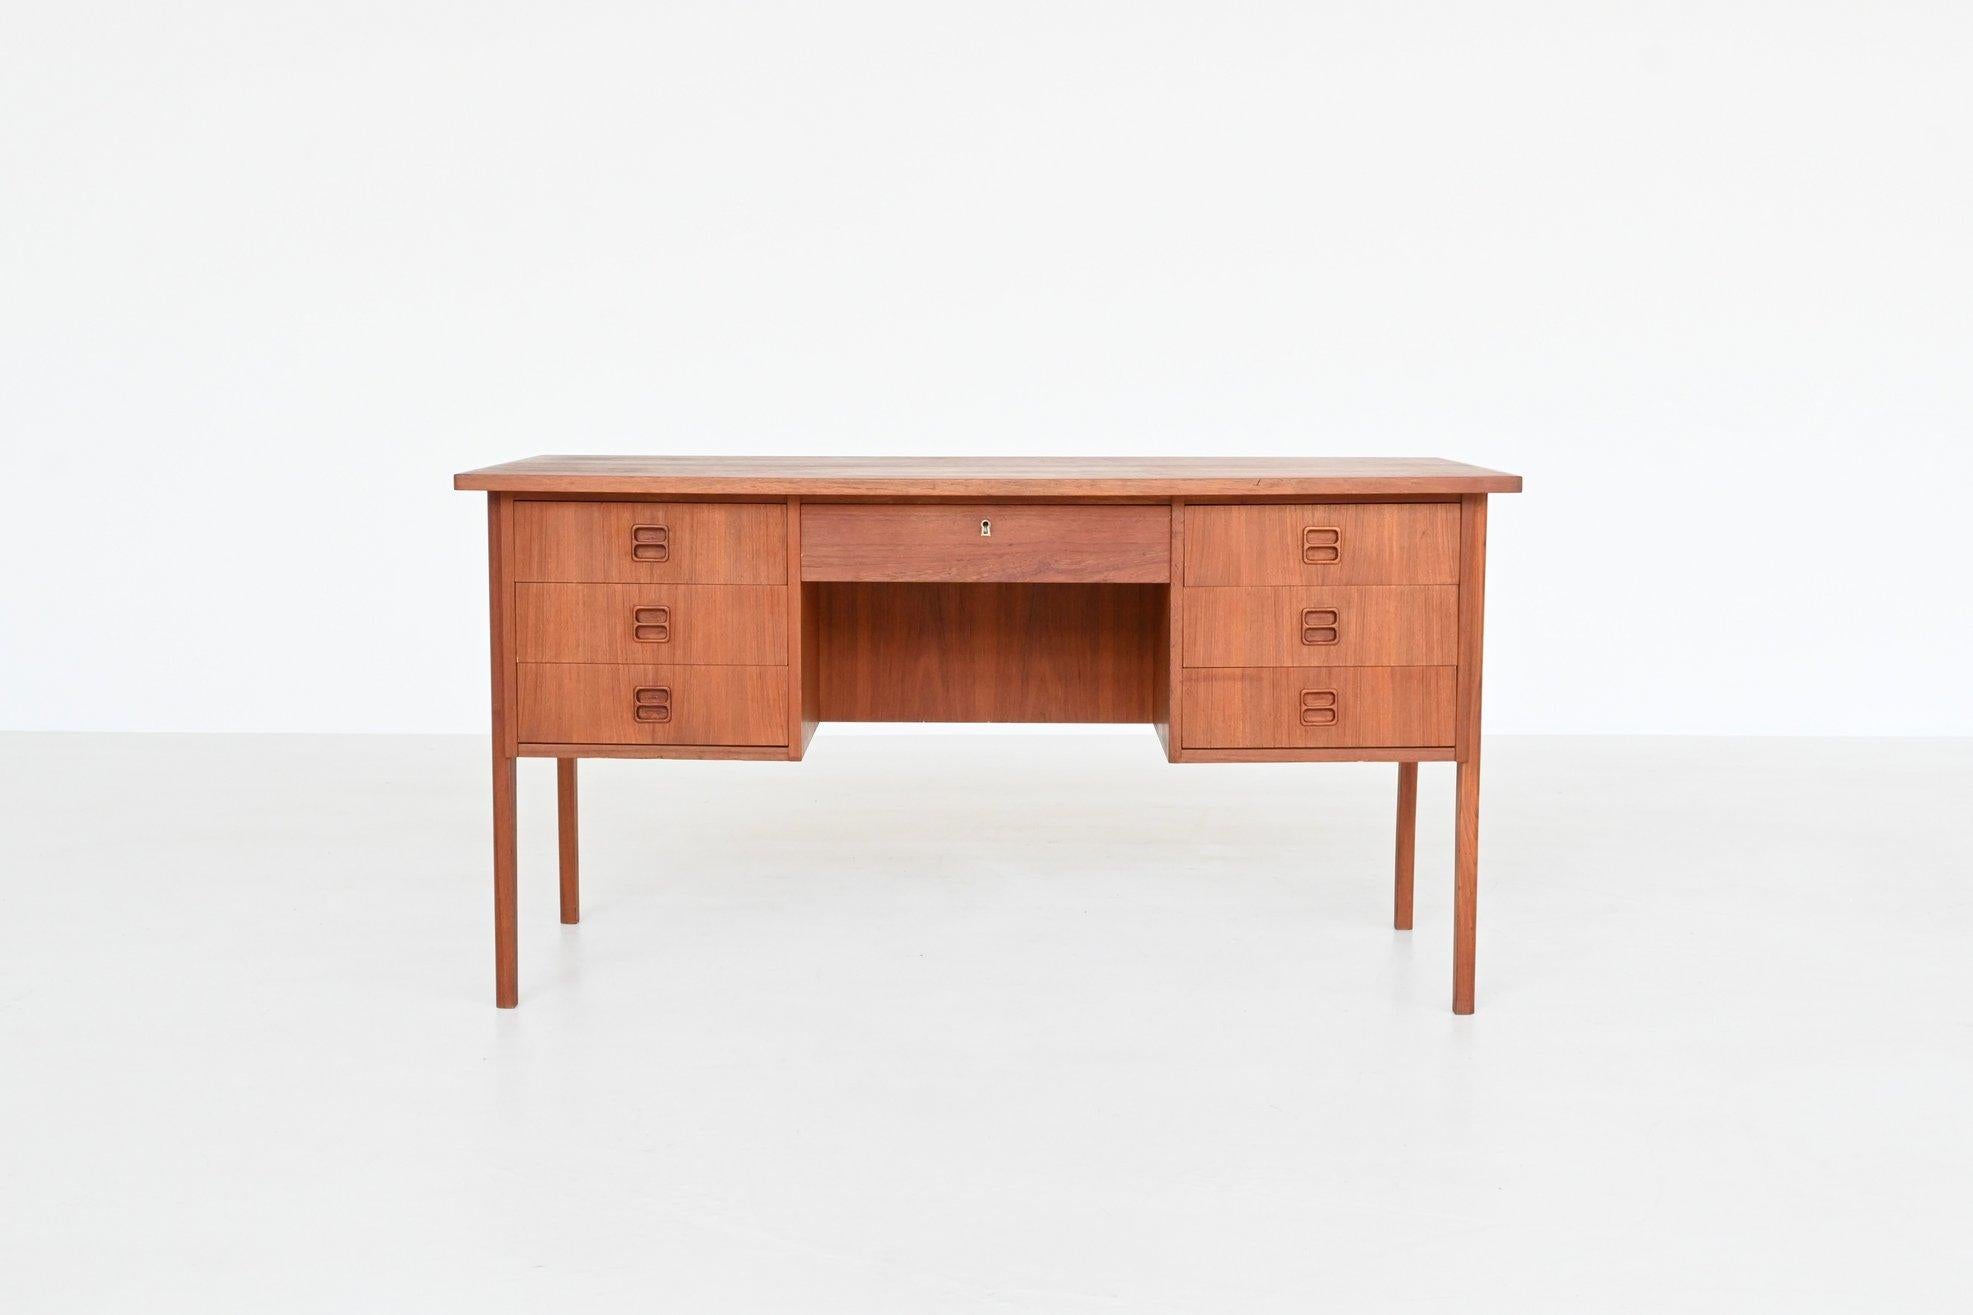 Beautiful symmetric shaped desk by unknown designer or manufacturer, Denmark 1960. It has functional storage space with three deep drawers on each side, one drawer in the middle between the drawer units and a shelf at the back. This well-crafted